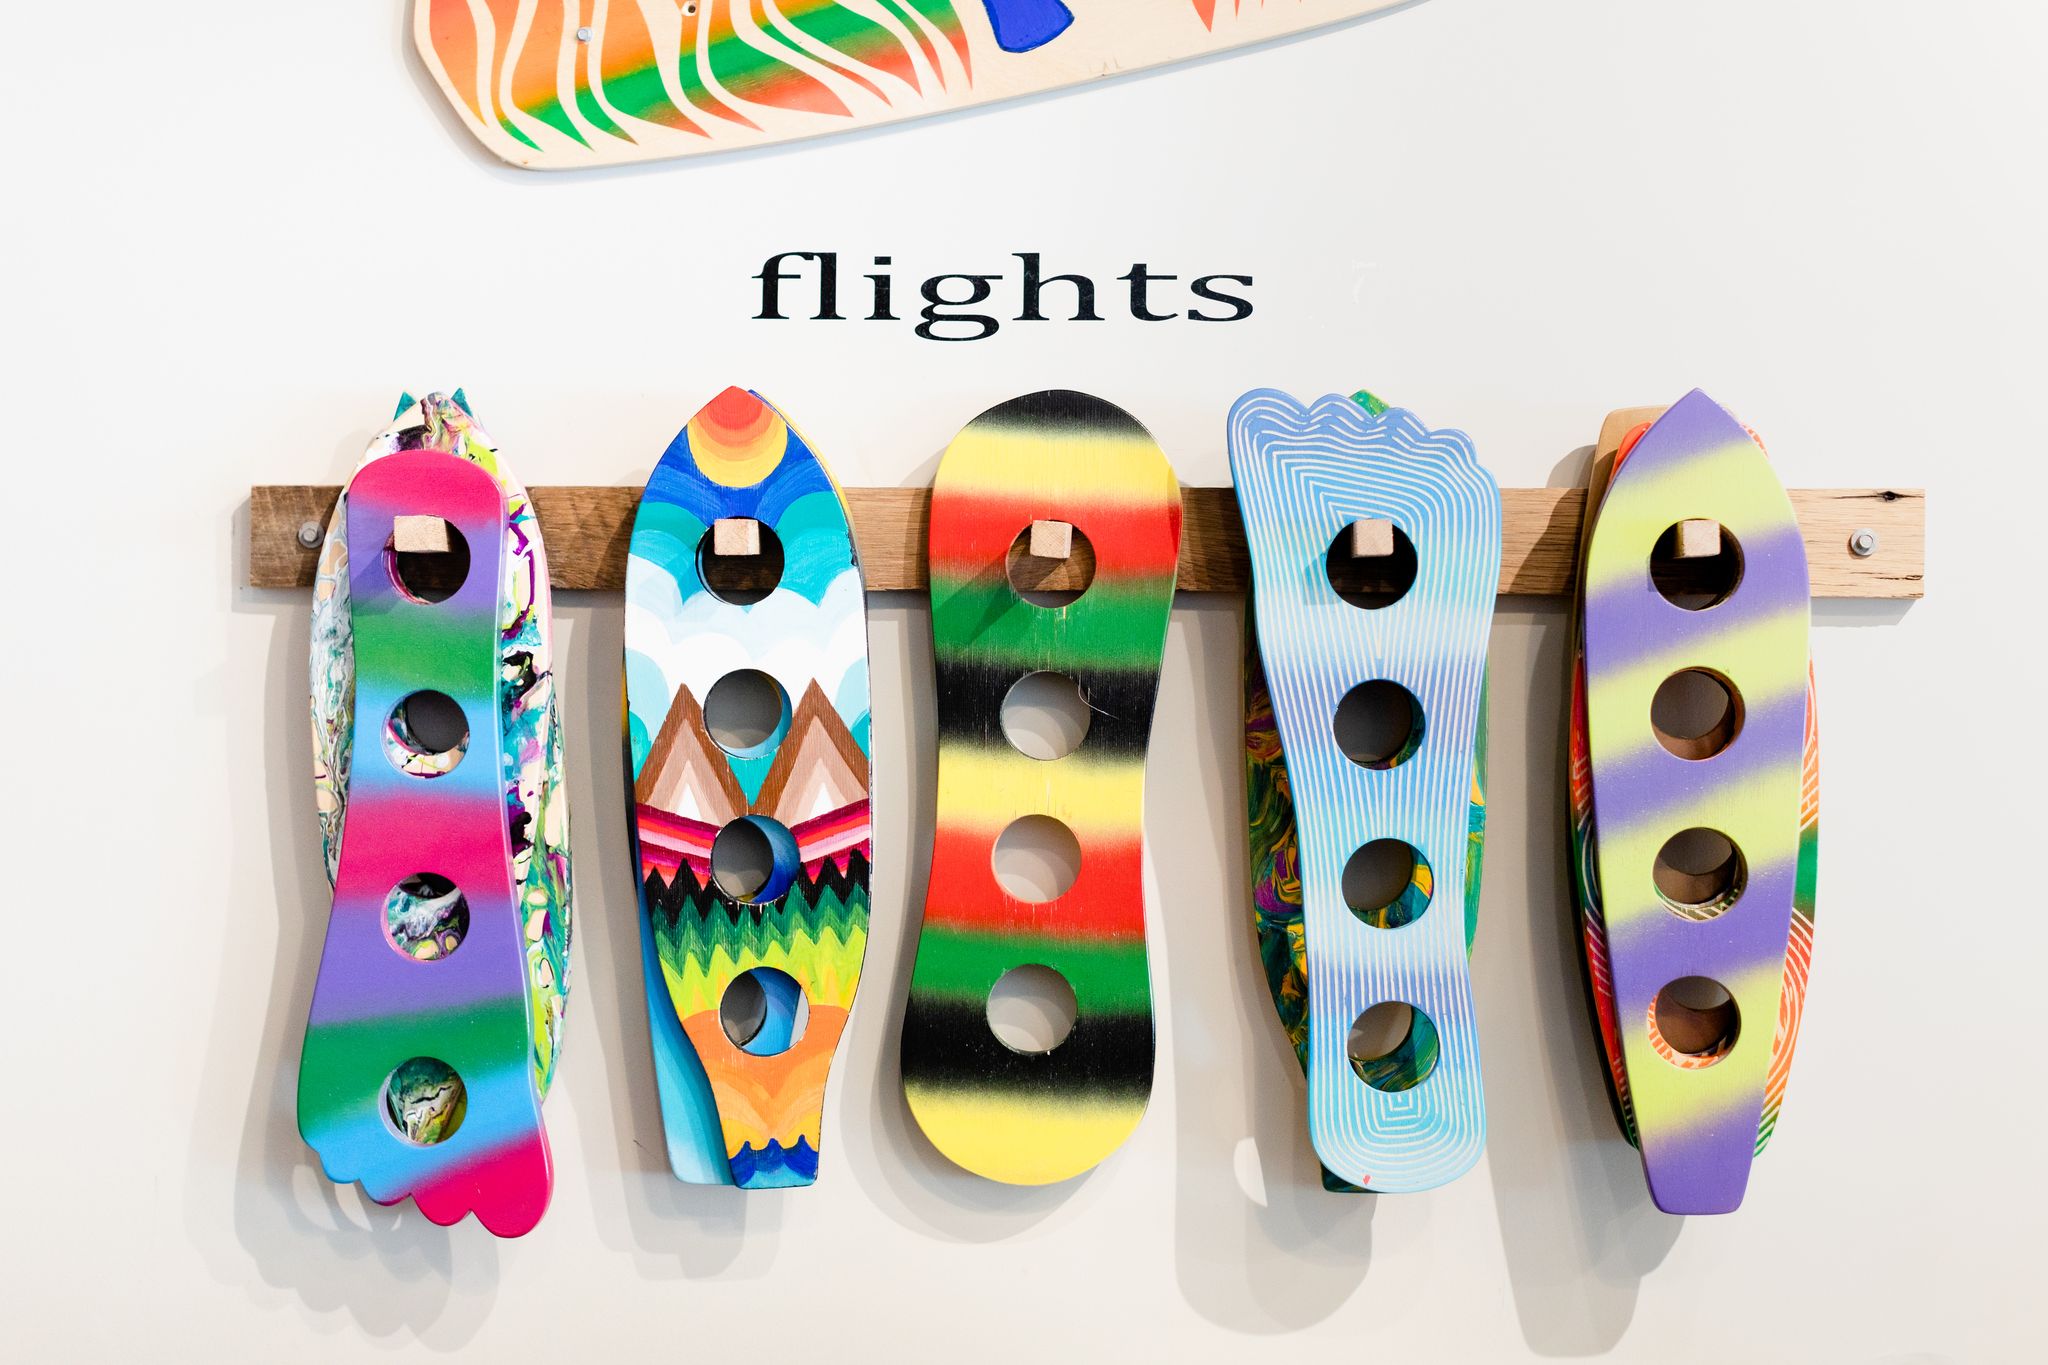 Flight holders shaped like surf boards and skate boards at Goofy Foot Taproom in High Point, NC.